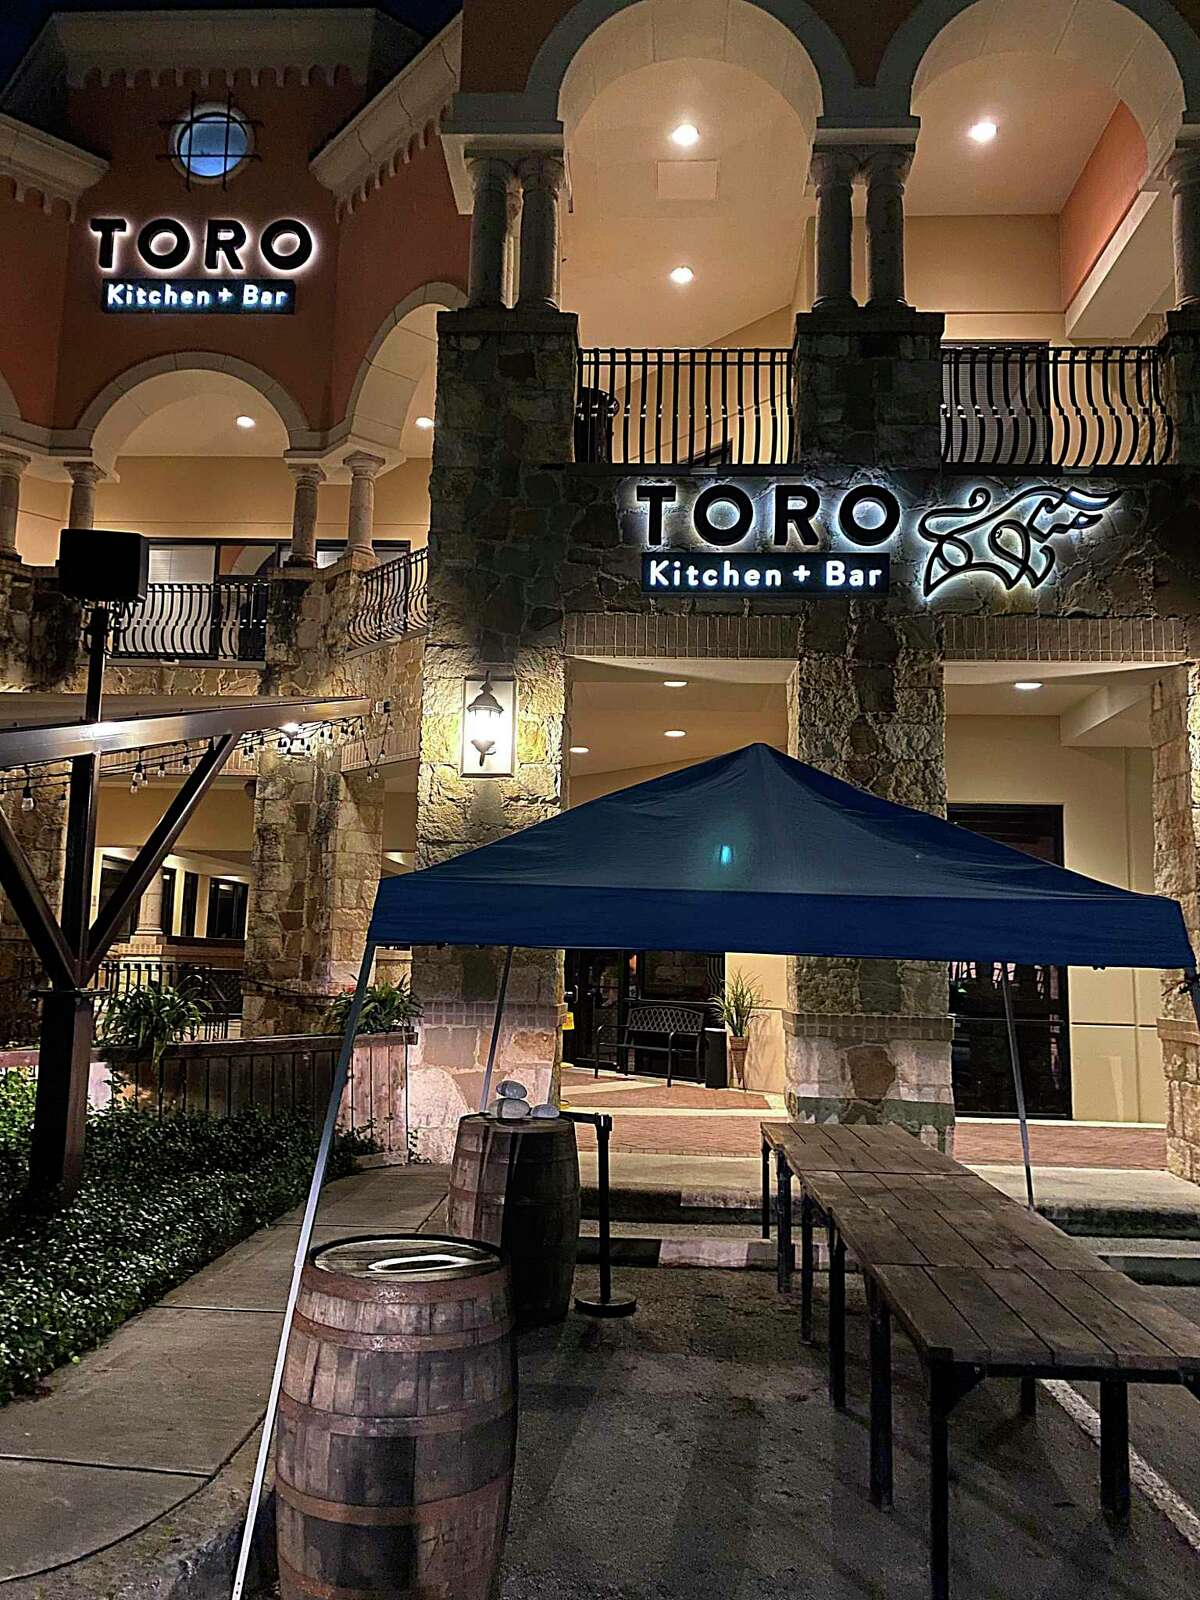 Toro Kitchen + Bar in Stone Oak is handling takeout from a curbside canopy during the coronavirus crisis.